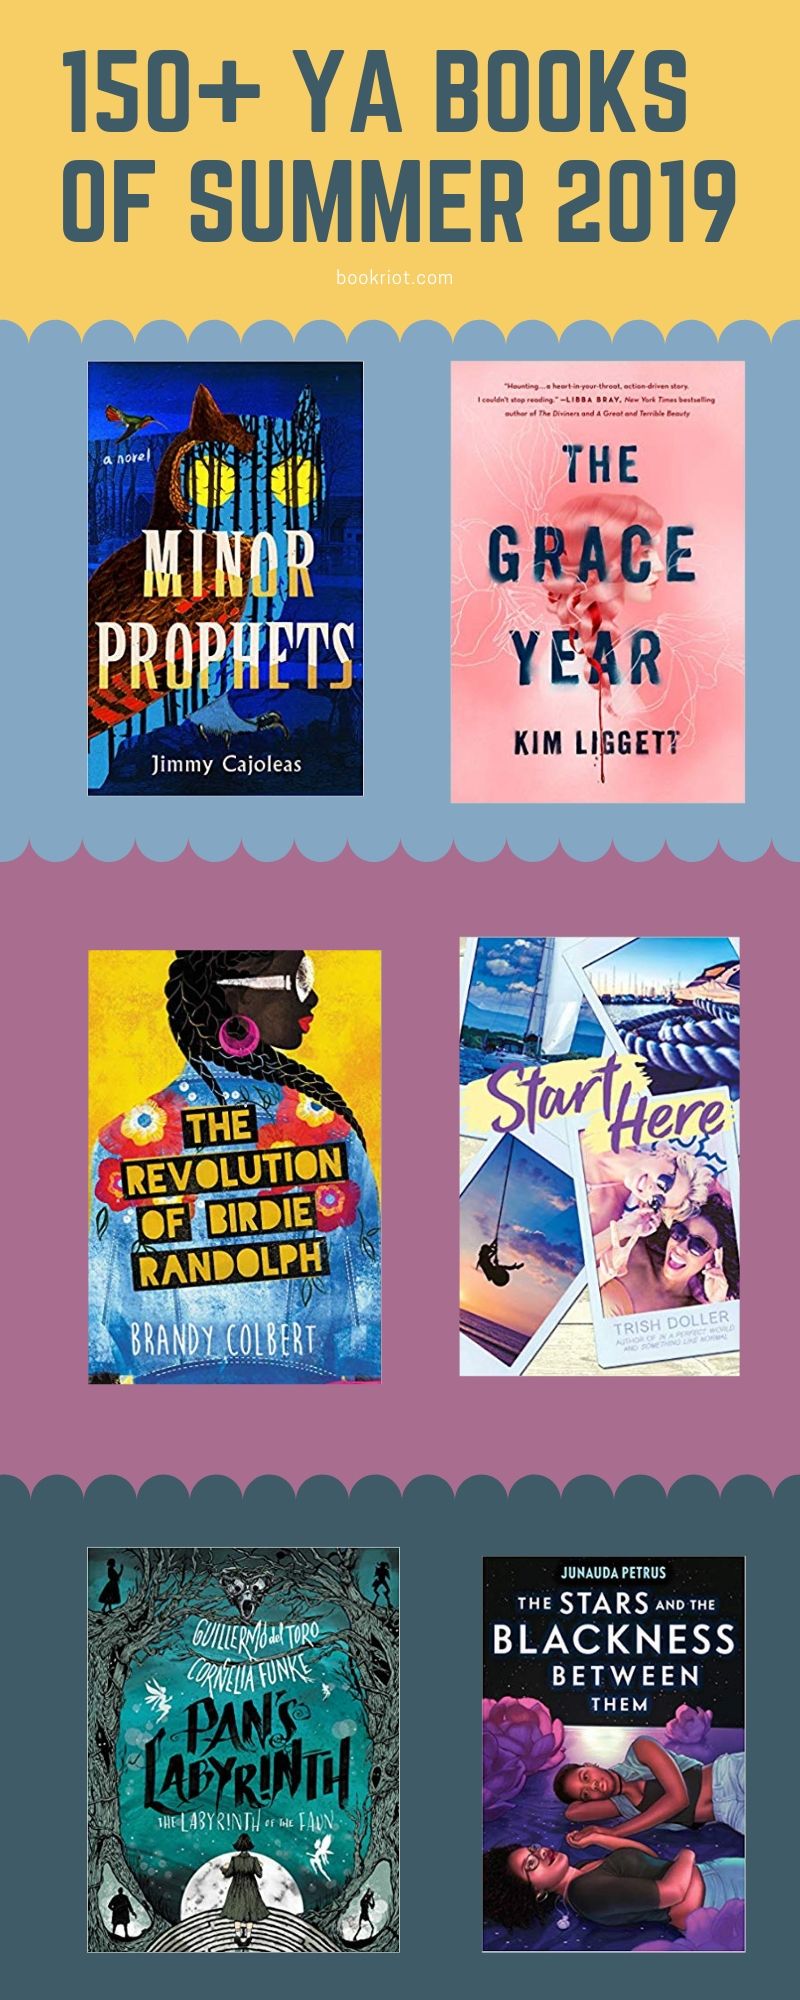 Summer 2019 YA Books 150+ New Titles Hitting Shelves Between July and